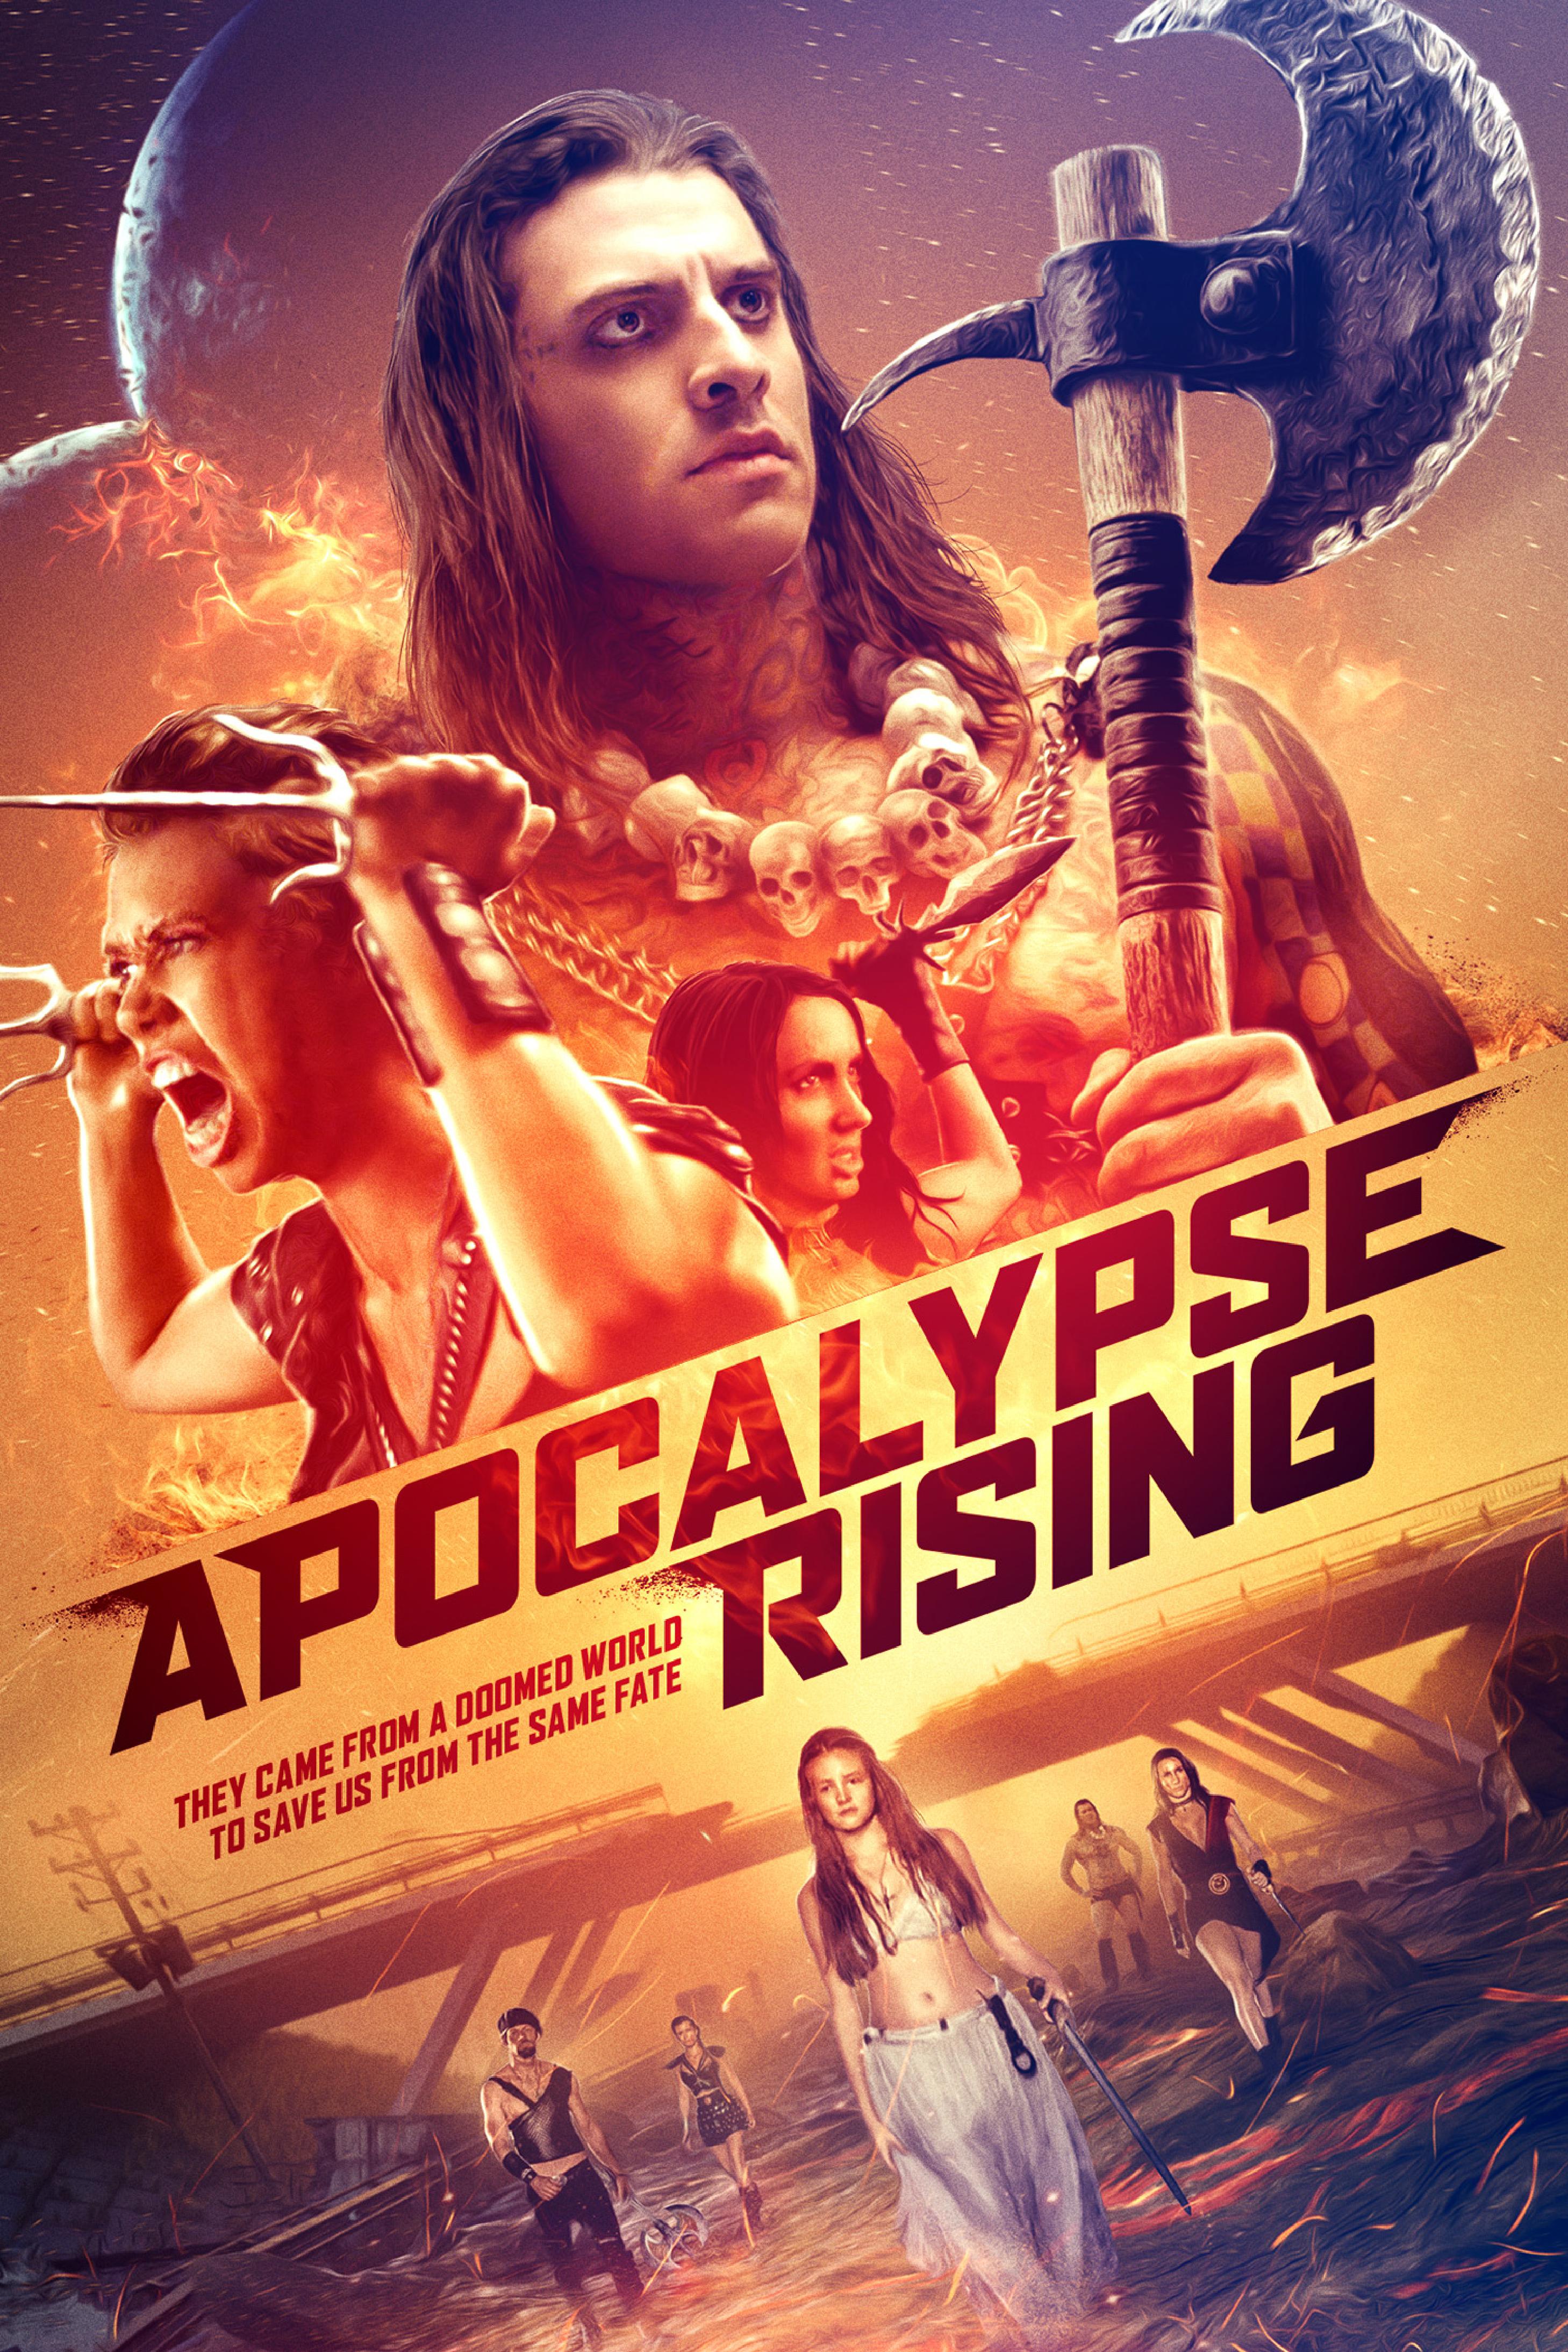 Download Apocalypse Rising 2018 UNRATED Hindi ORG Dual Audio 480p BluRay ESub 300MB